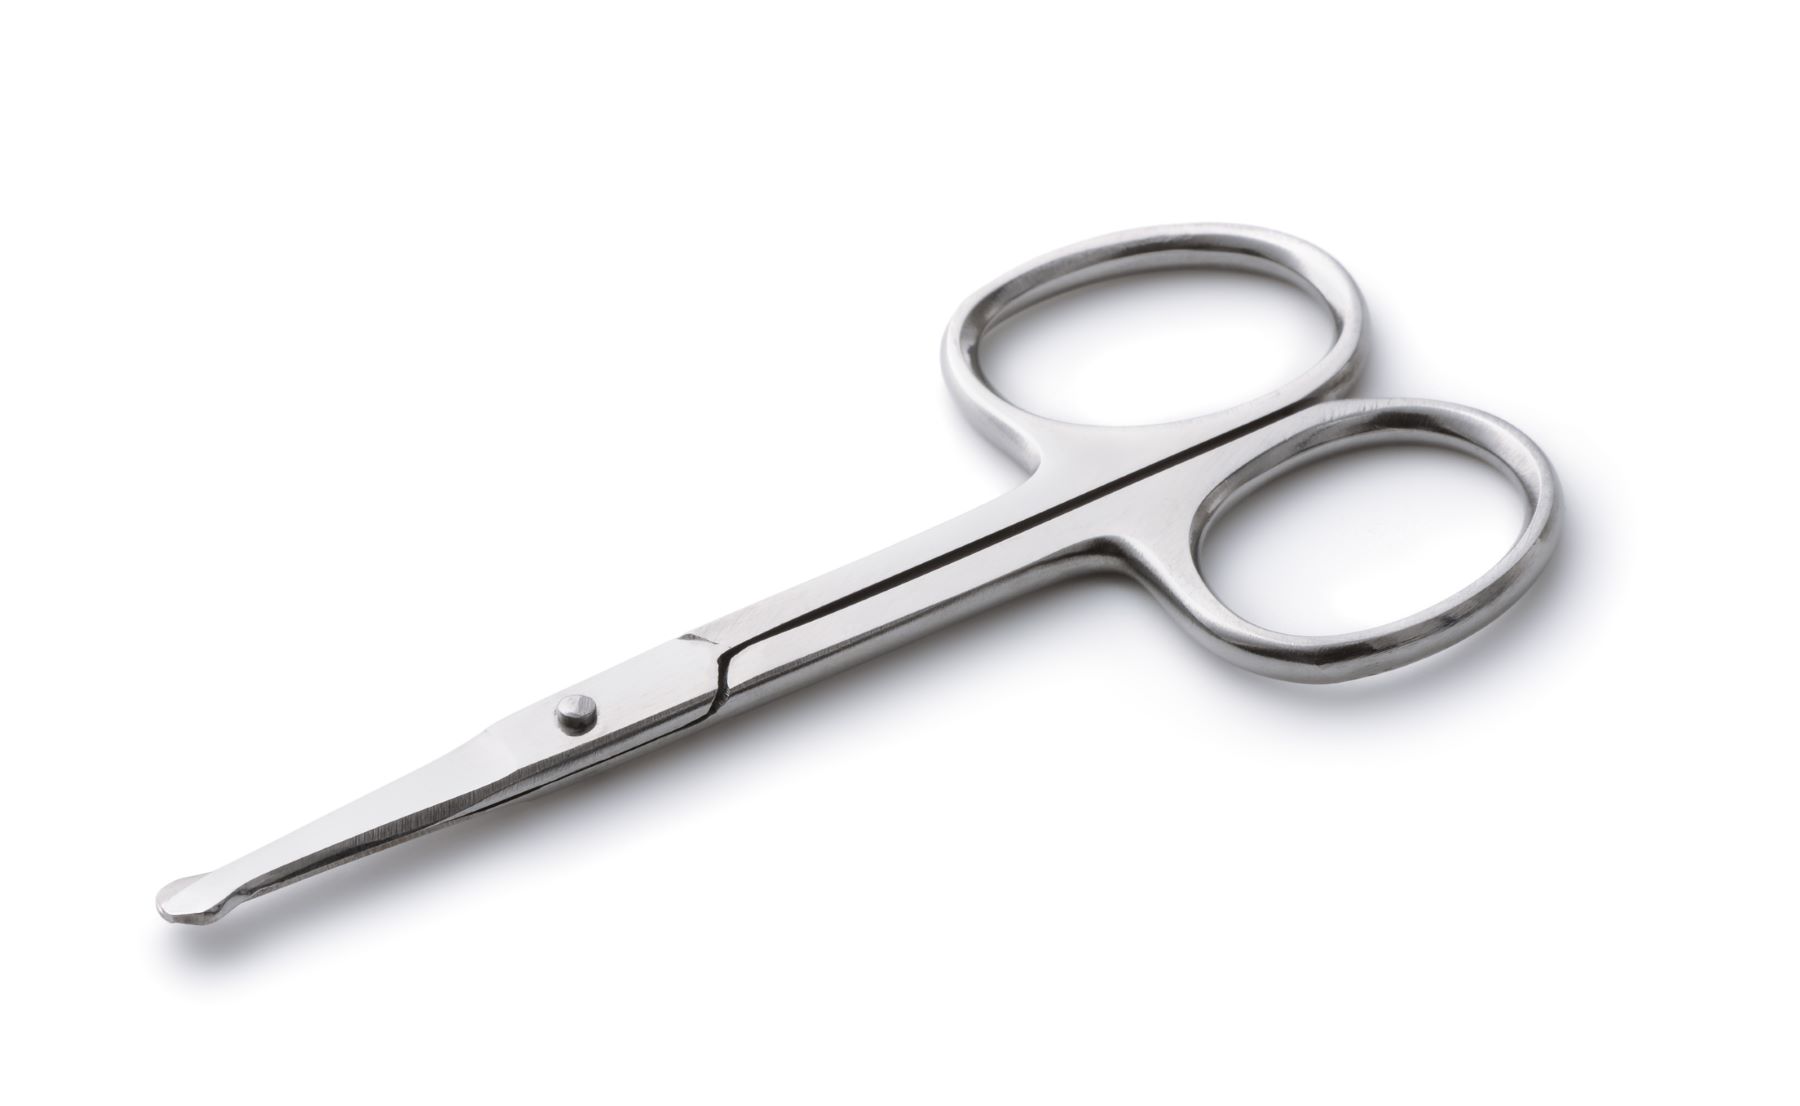 A pair of short, rounded scissors